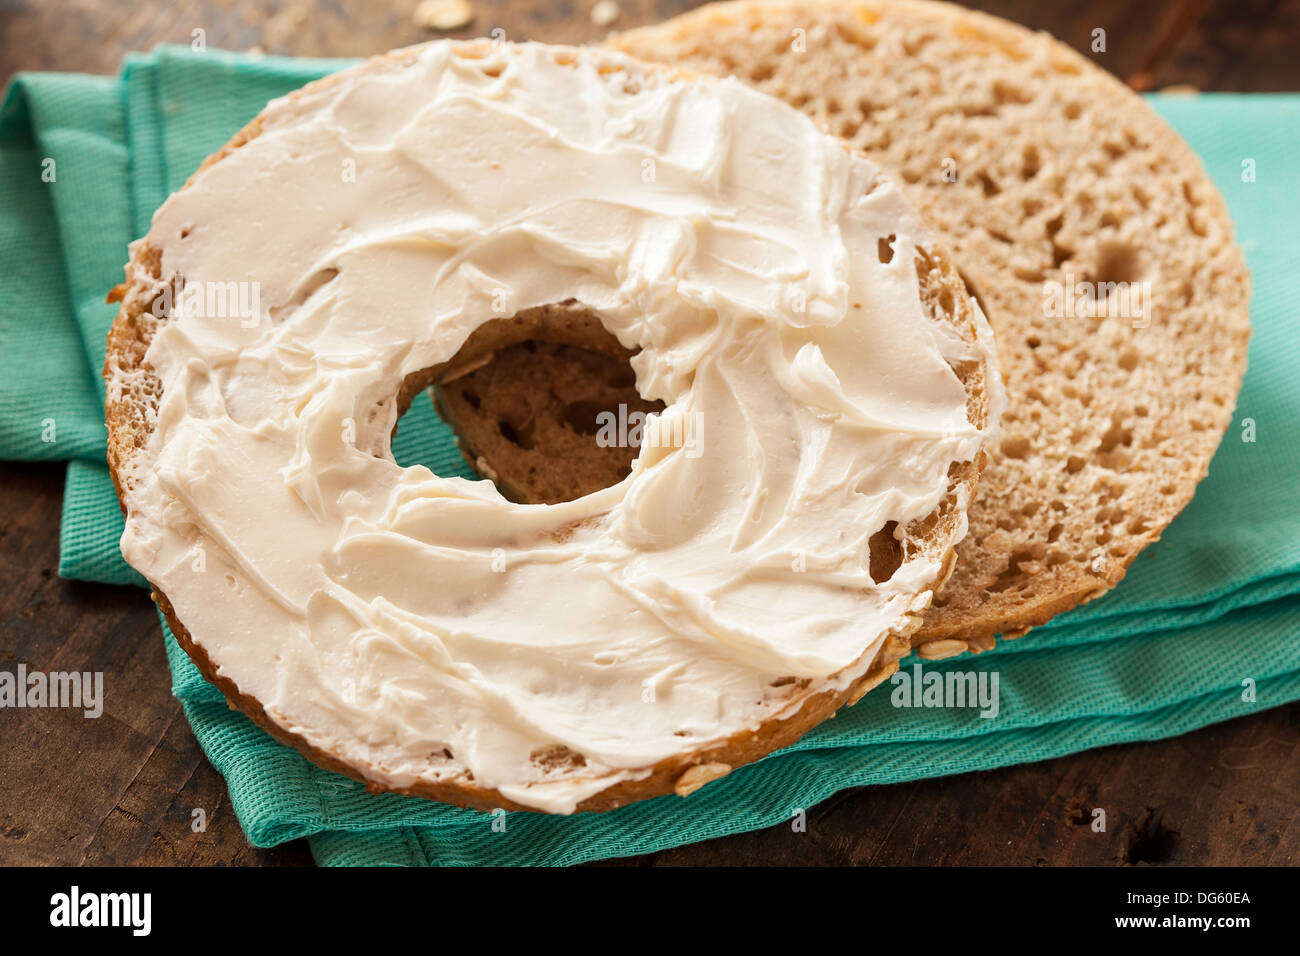 Healthy Organic Whole Grain Bagel with Cream Cheese Stock Photo